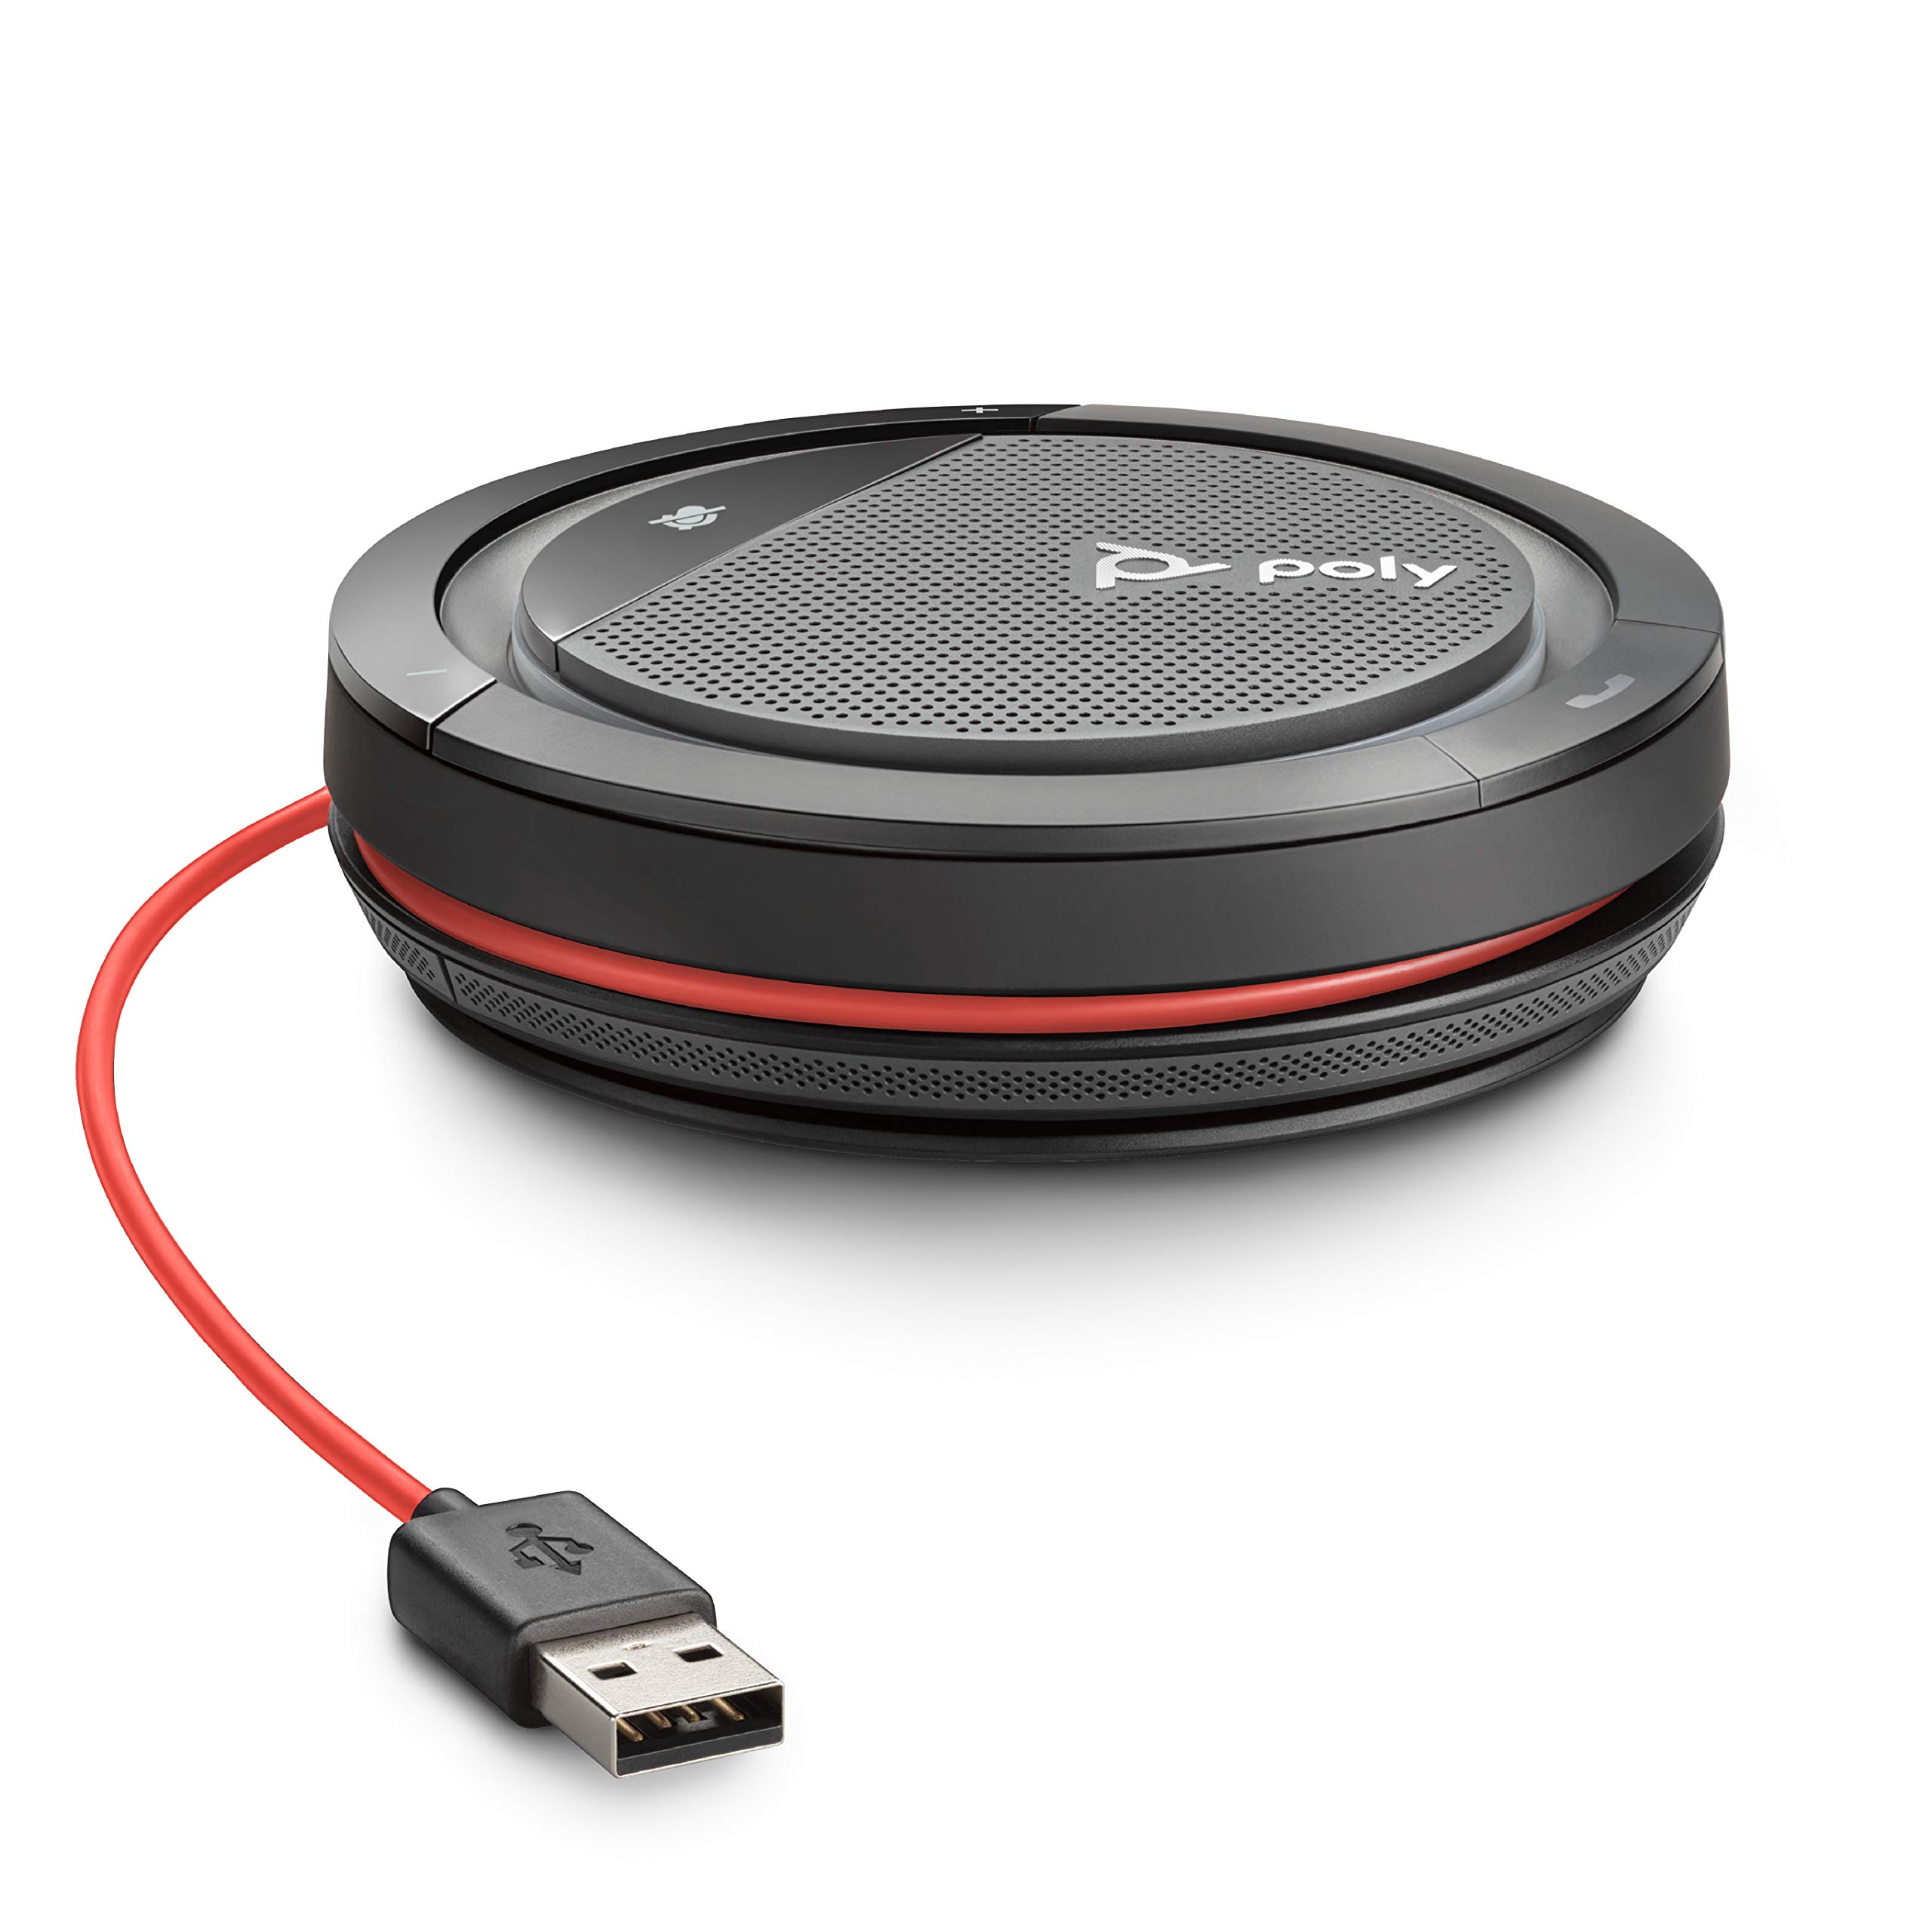 Plantronics Poly - Calisto 3200 Wired Speakerphone () - Personal Portable Speakerphone for Conference Calls- USB-A Compatible - Connect to your PC/Mac - Works with Teams, Zoom & more